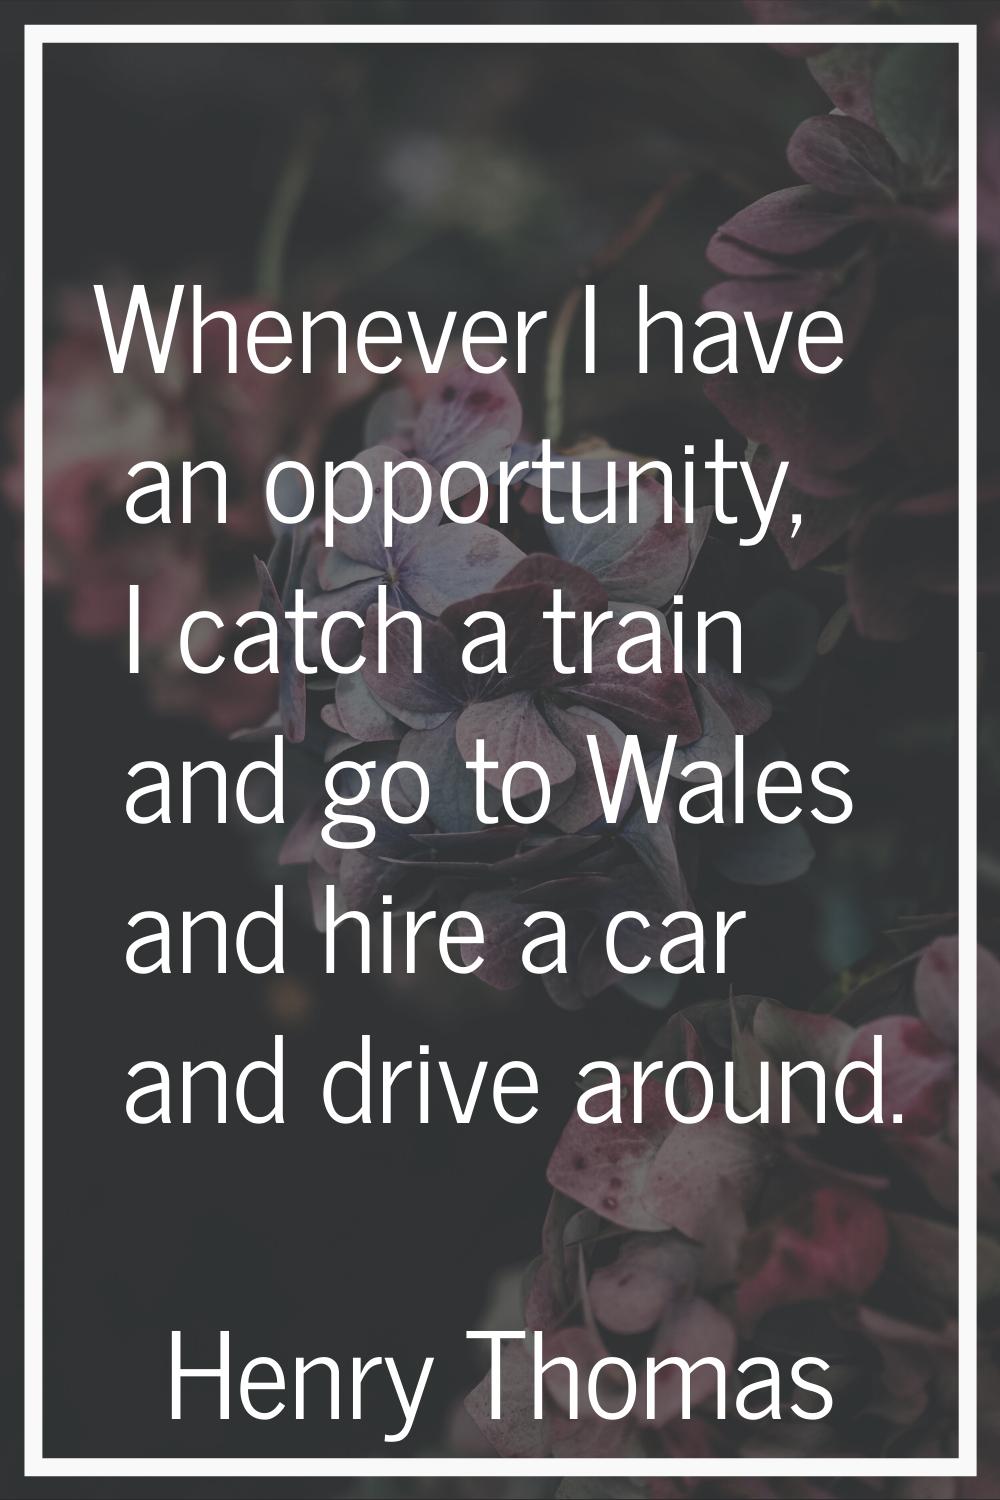 Whenever I have an opportunity, I catch a train and go to Wales and hire a car and drive around.